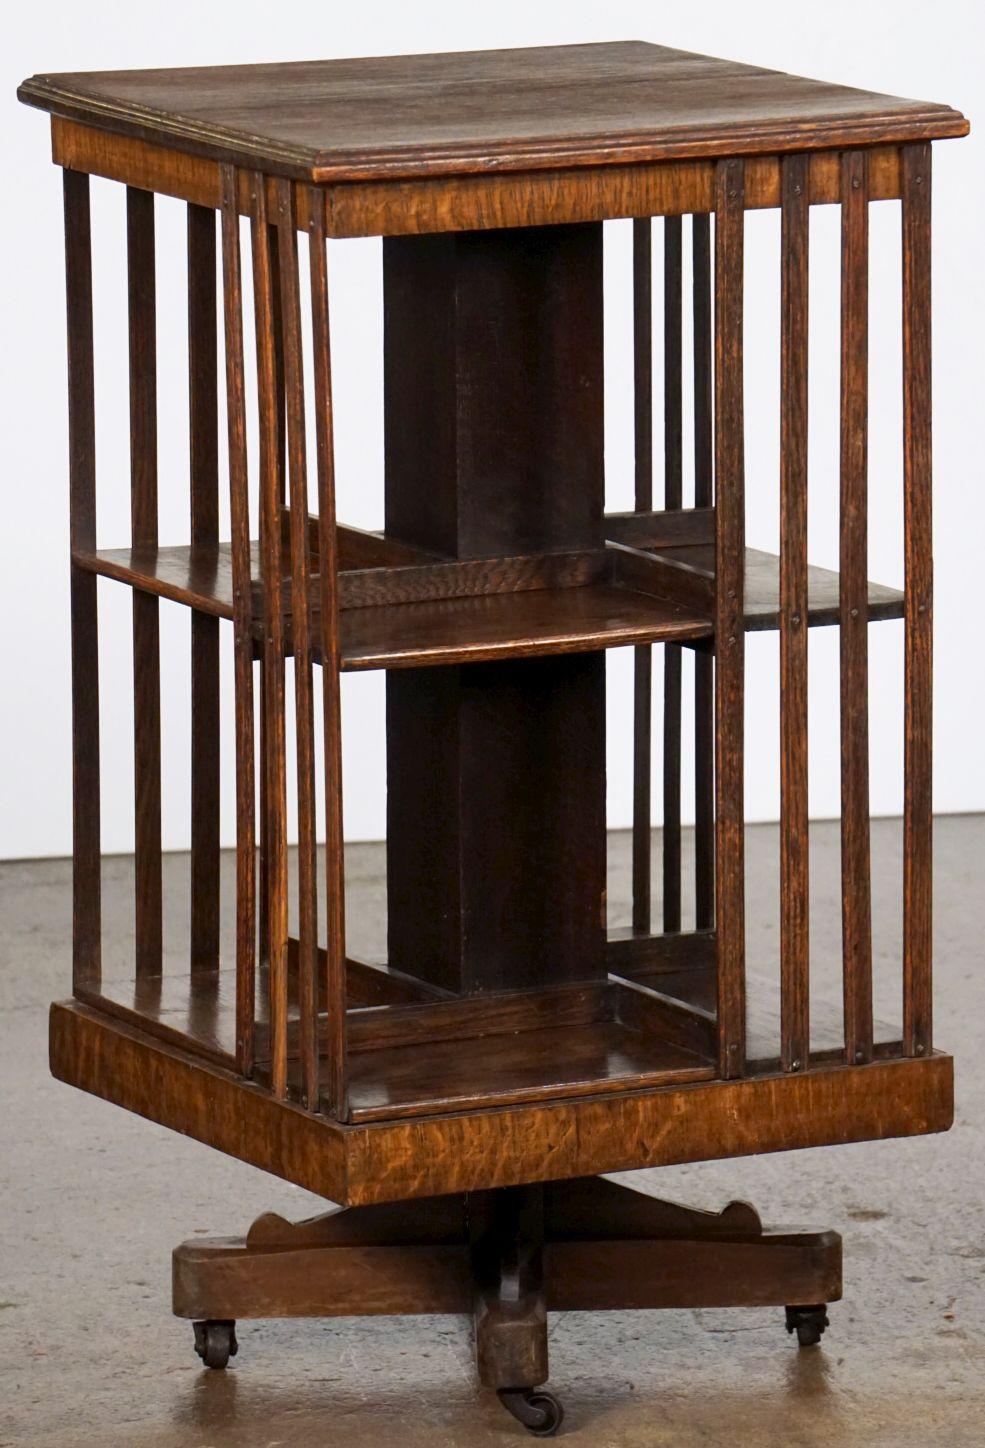 A fine English revolving book stand of oak from the Edwardian era, featuring a two-tiered bookcase sub-divided into eight shelving compartments, with a moulded square top connecting the lower two tiers with vertical latticed slats. The entire unit